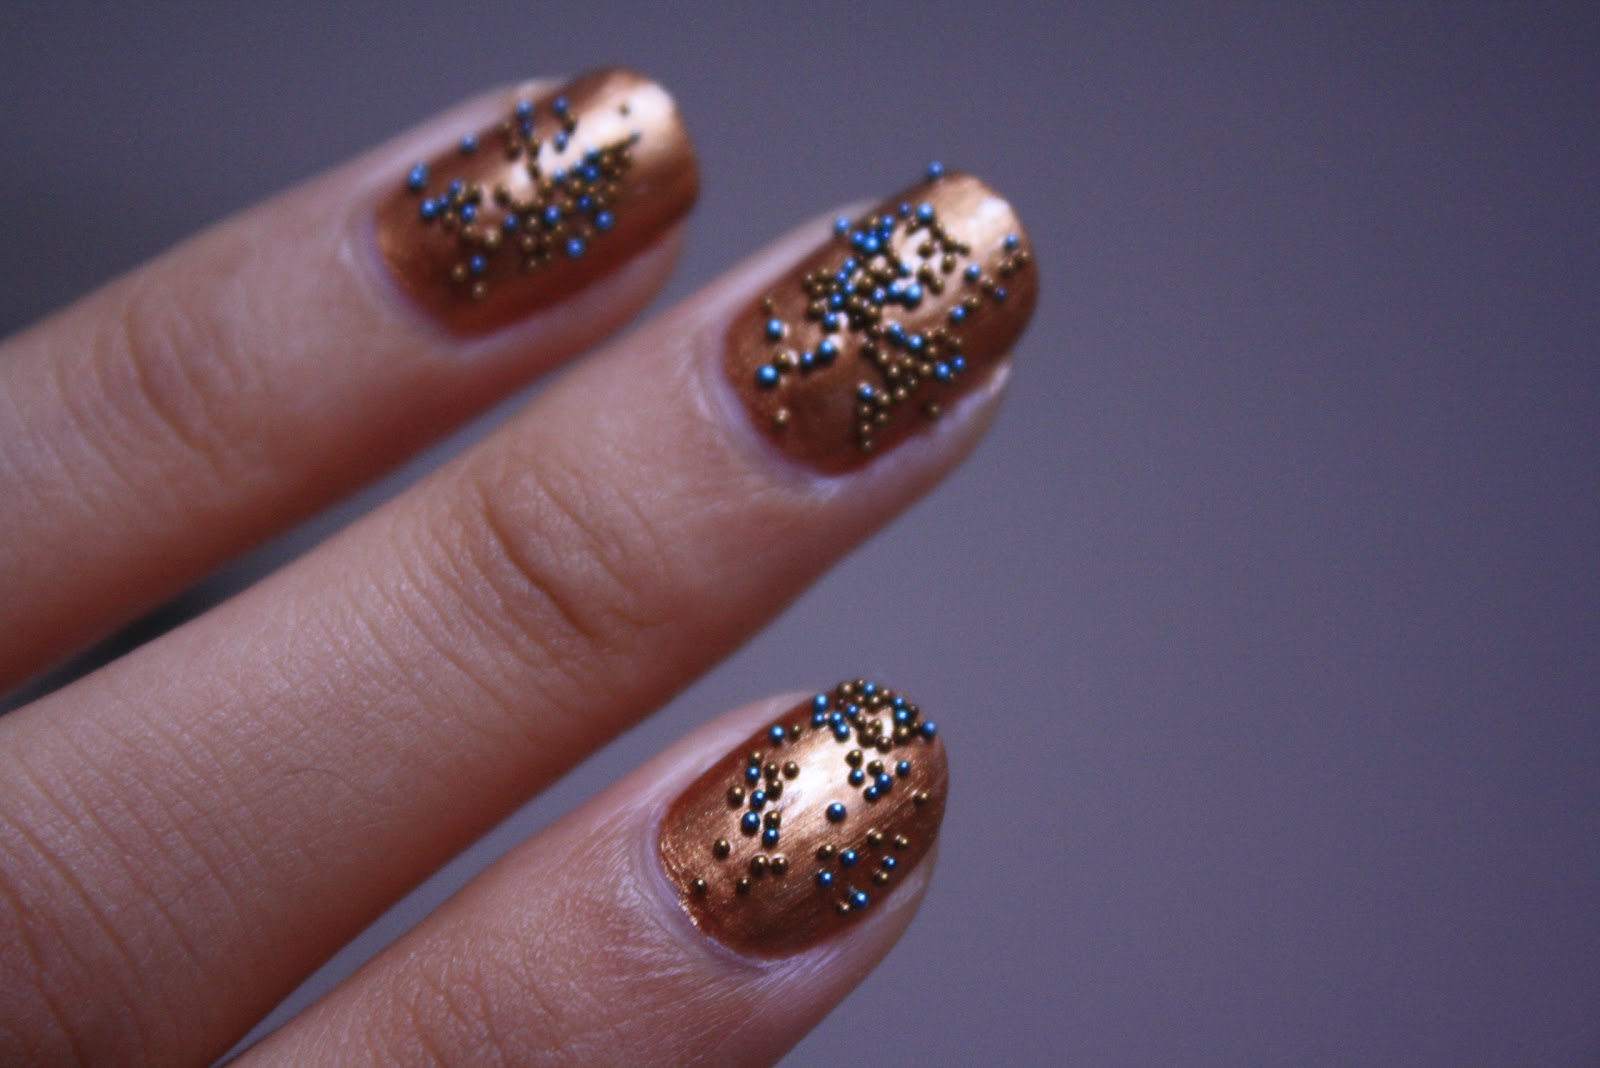 6. How to Create a Caviar Effect on Nails - wide 3